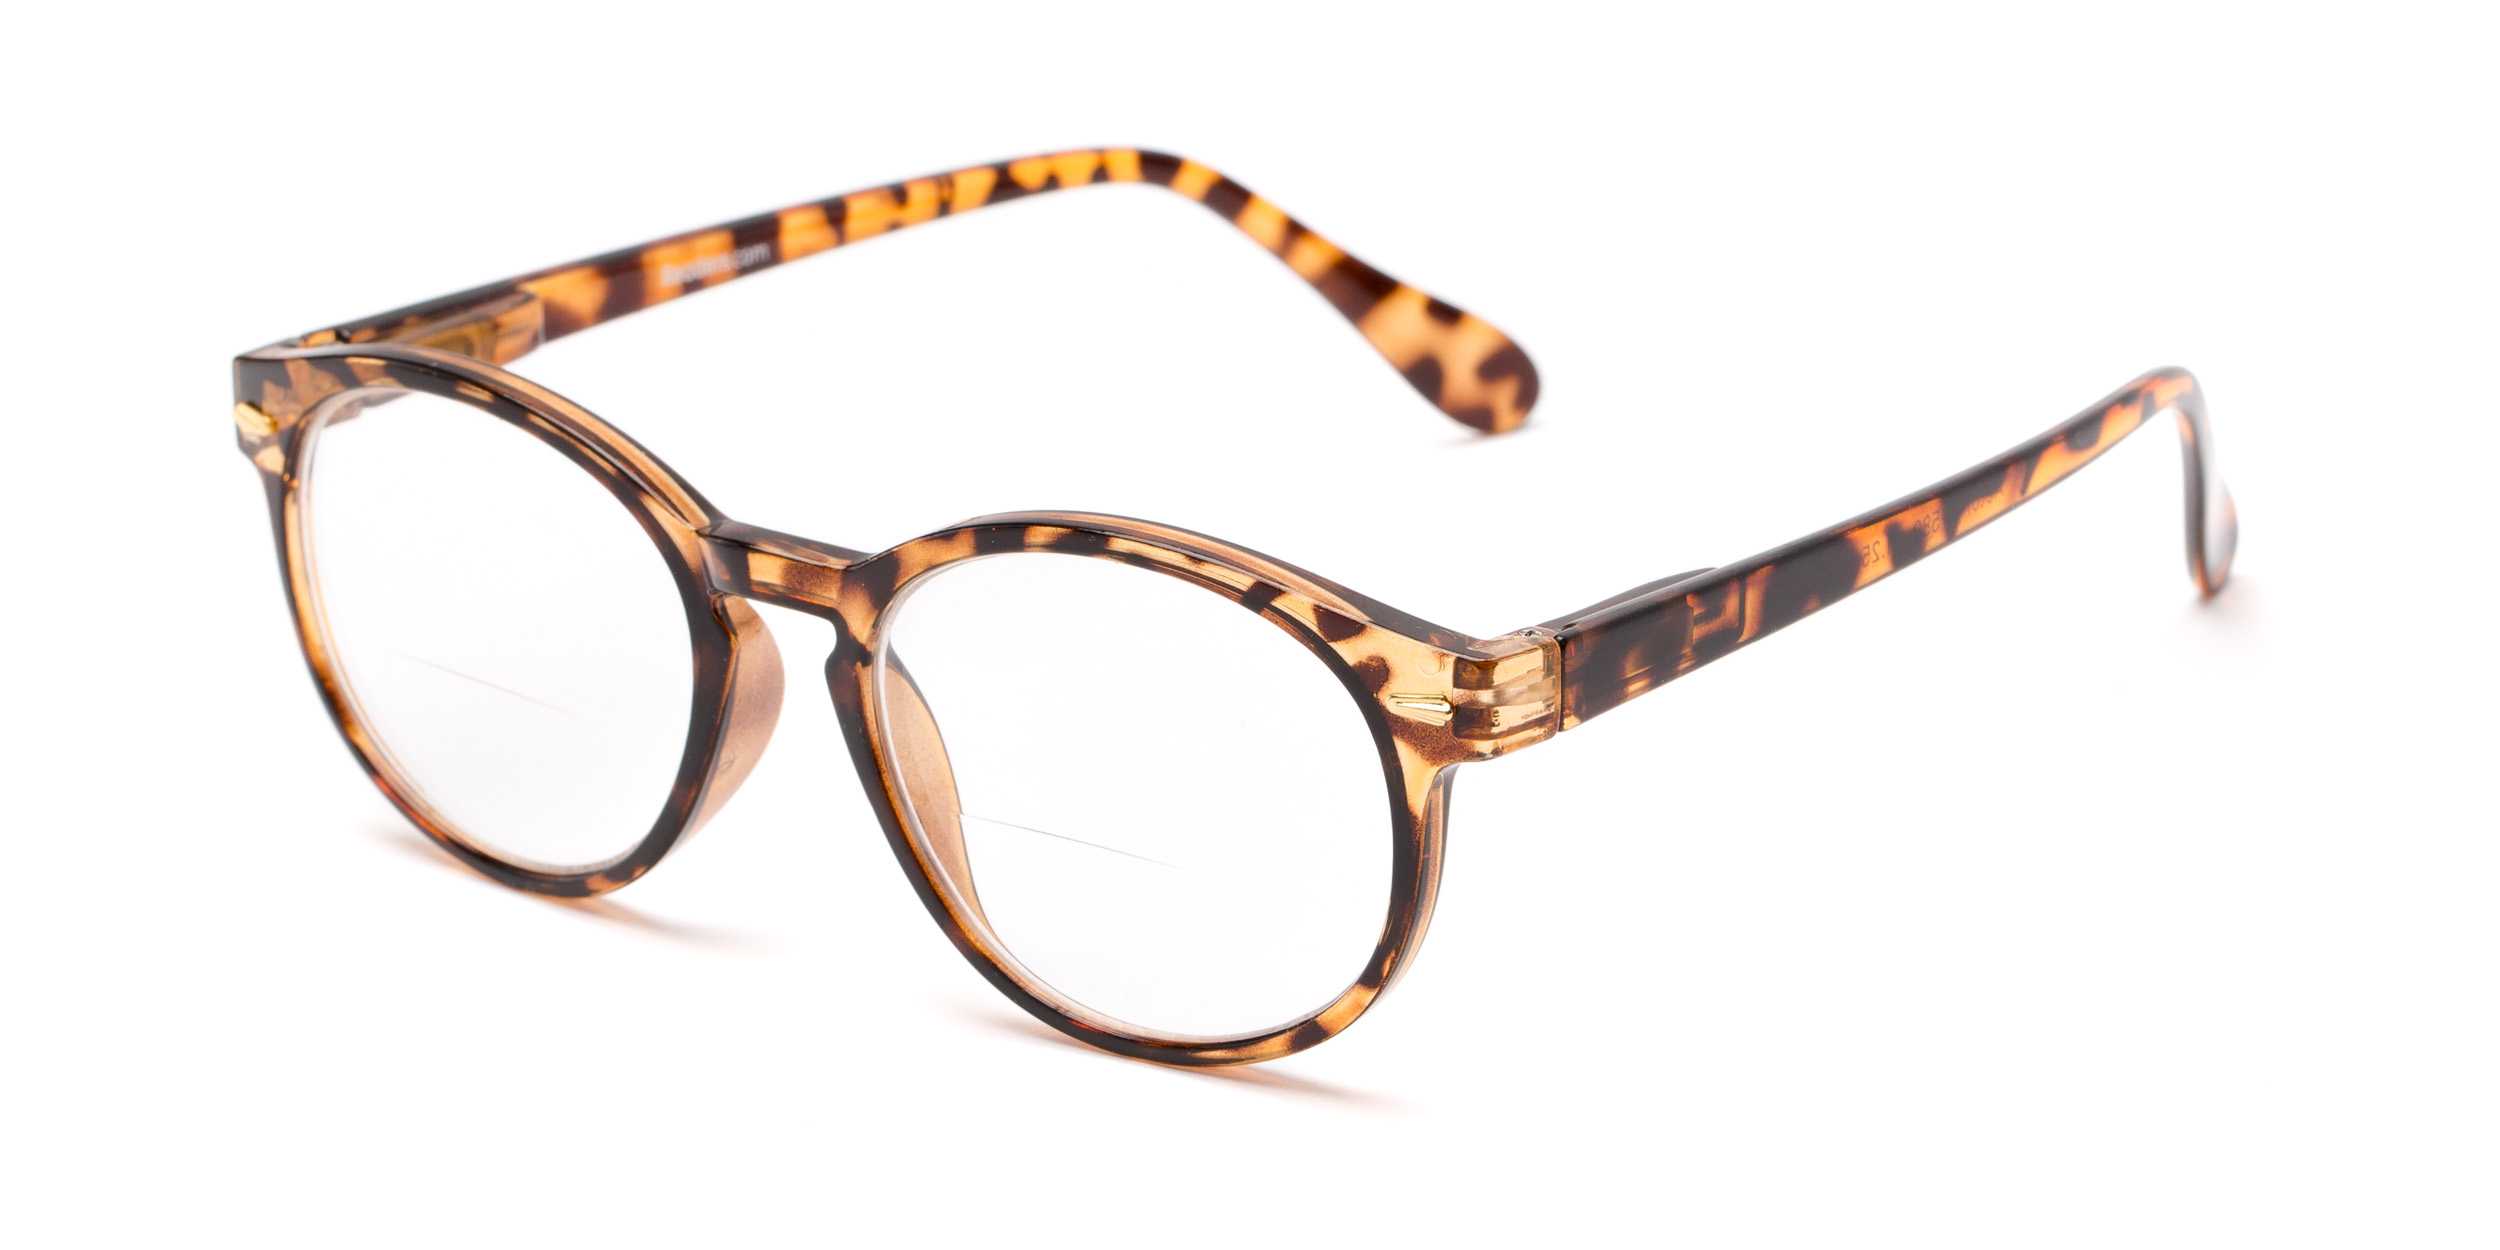 Round Bifocal Reading Glasses in Dark Brown Tortoise by Readers.com - The Actor - +1.75